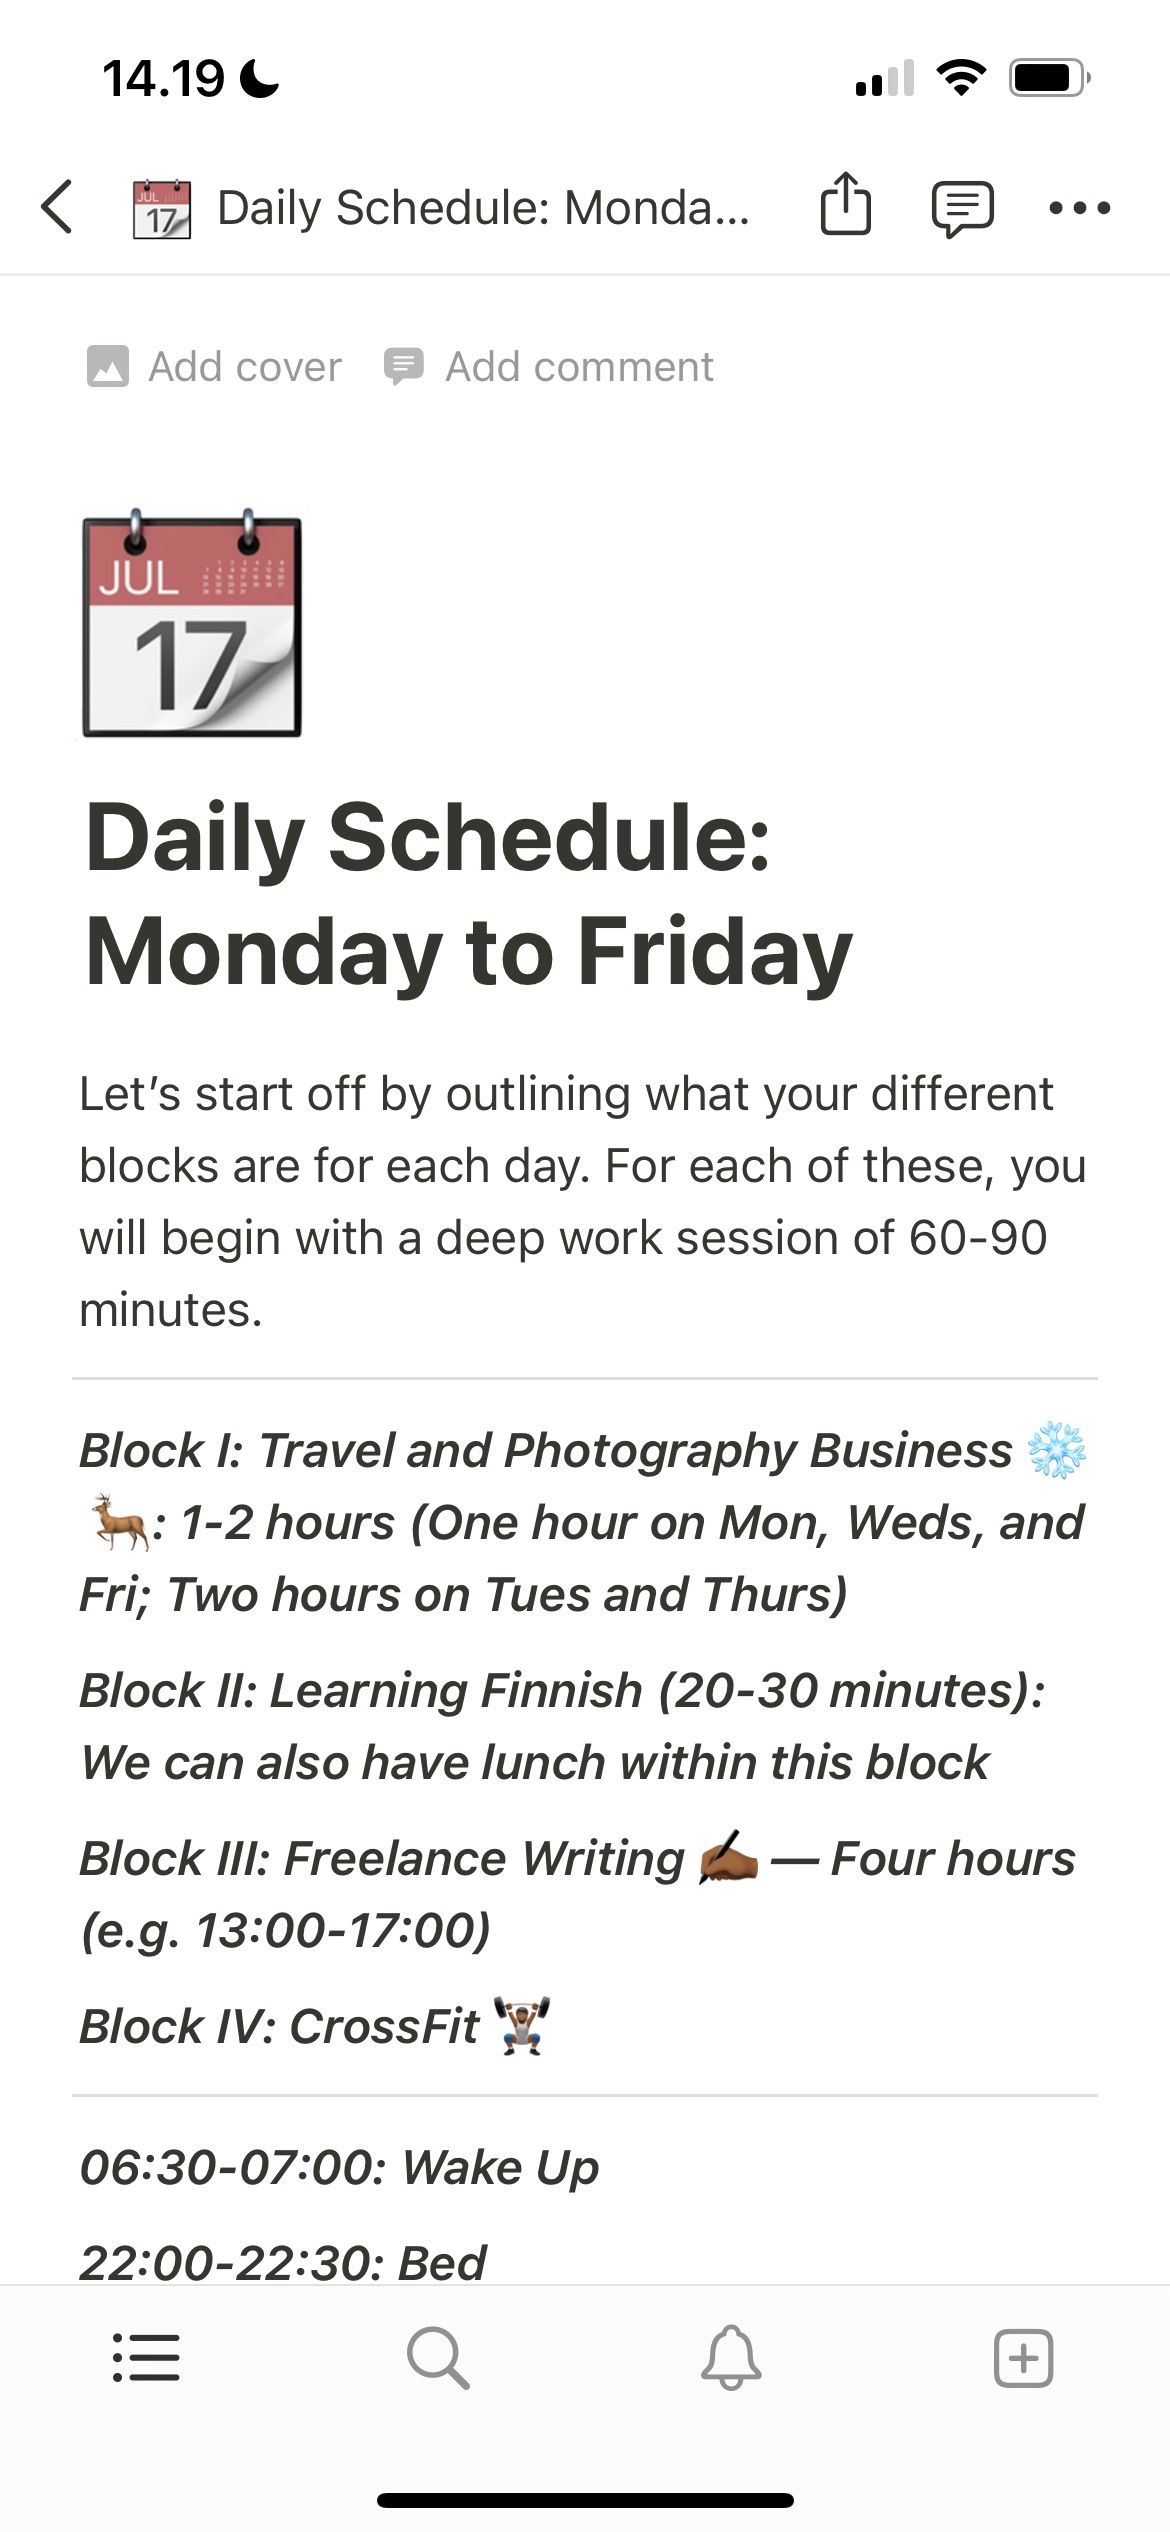 A Daily Schedule in Notion